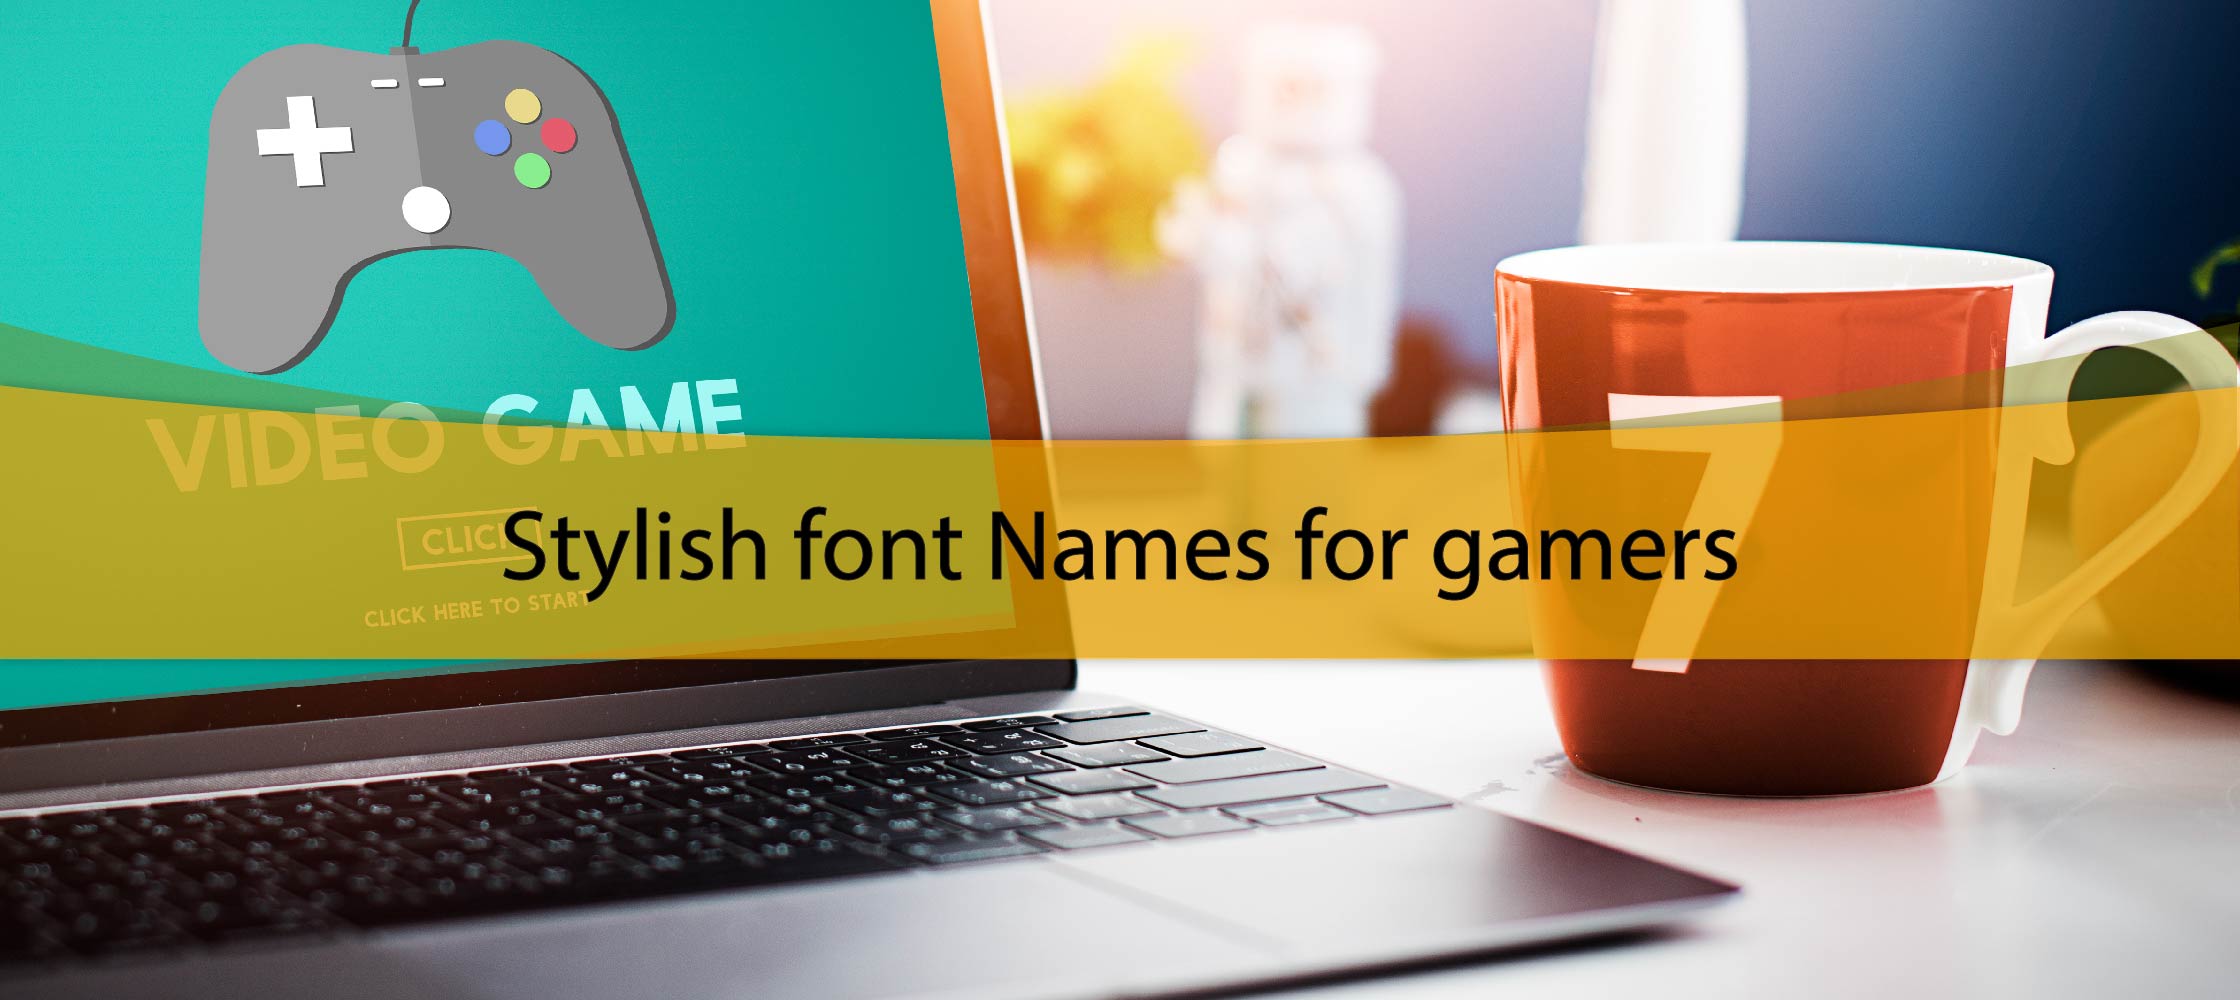 Stylish Font Names for Gamers